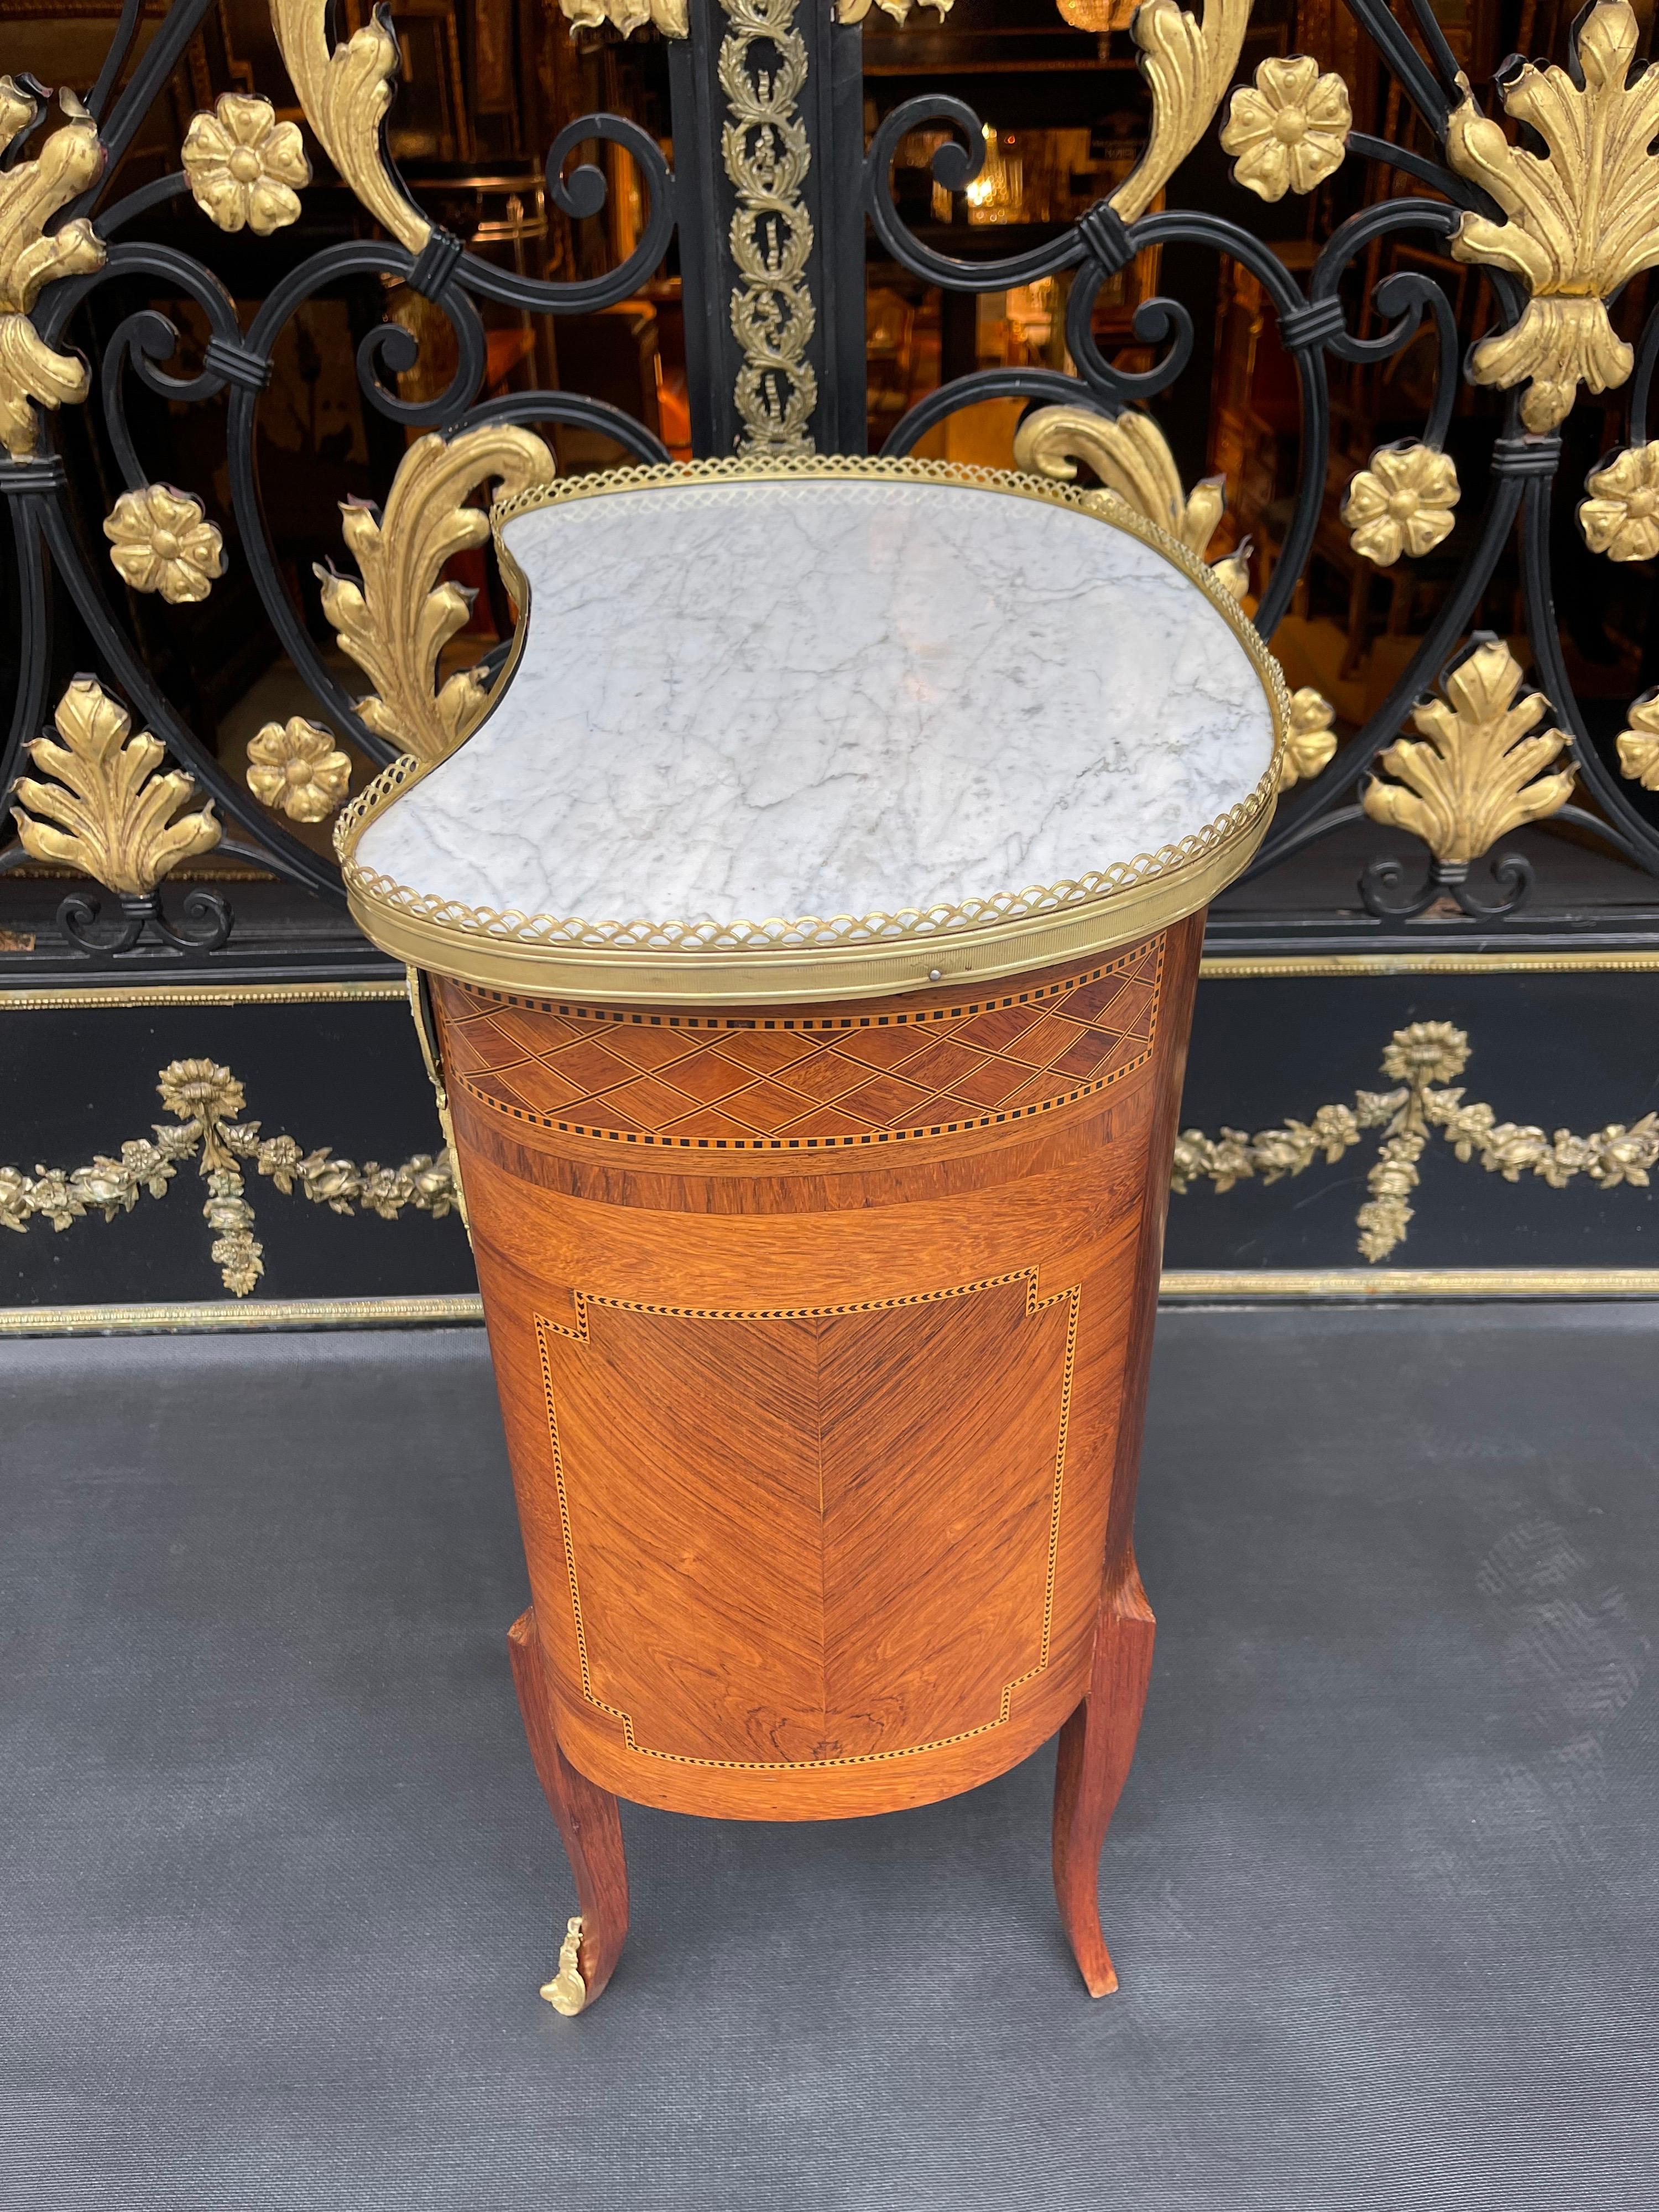 Brass 19th Century Royal Side Table, Paris, Fire-Gilded, Louis XV